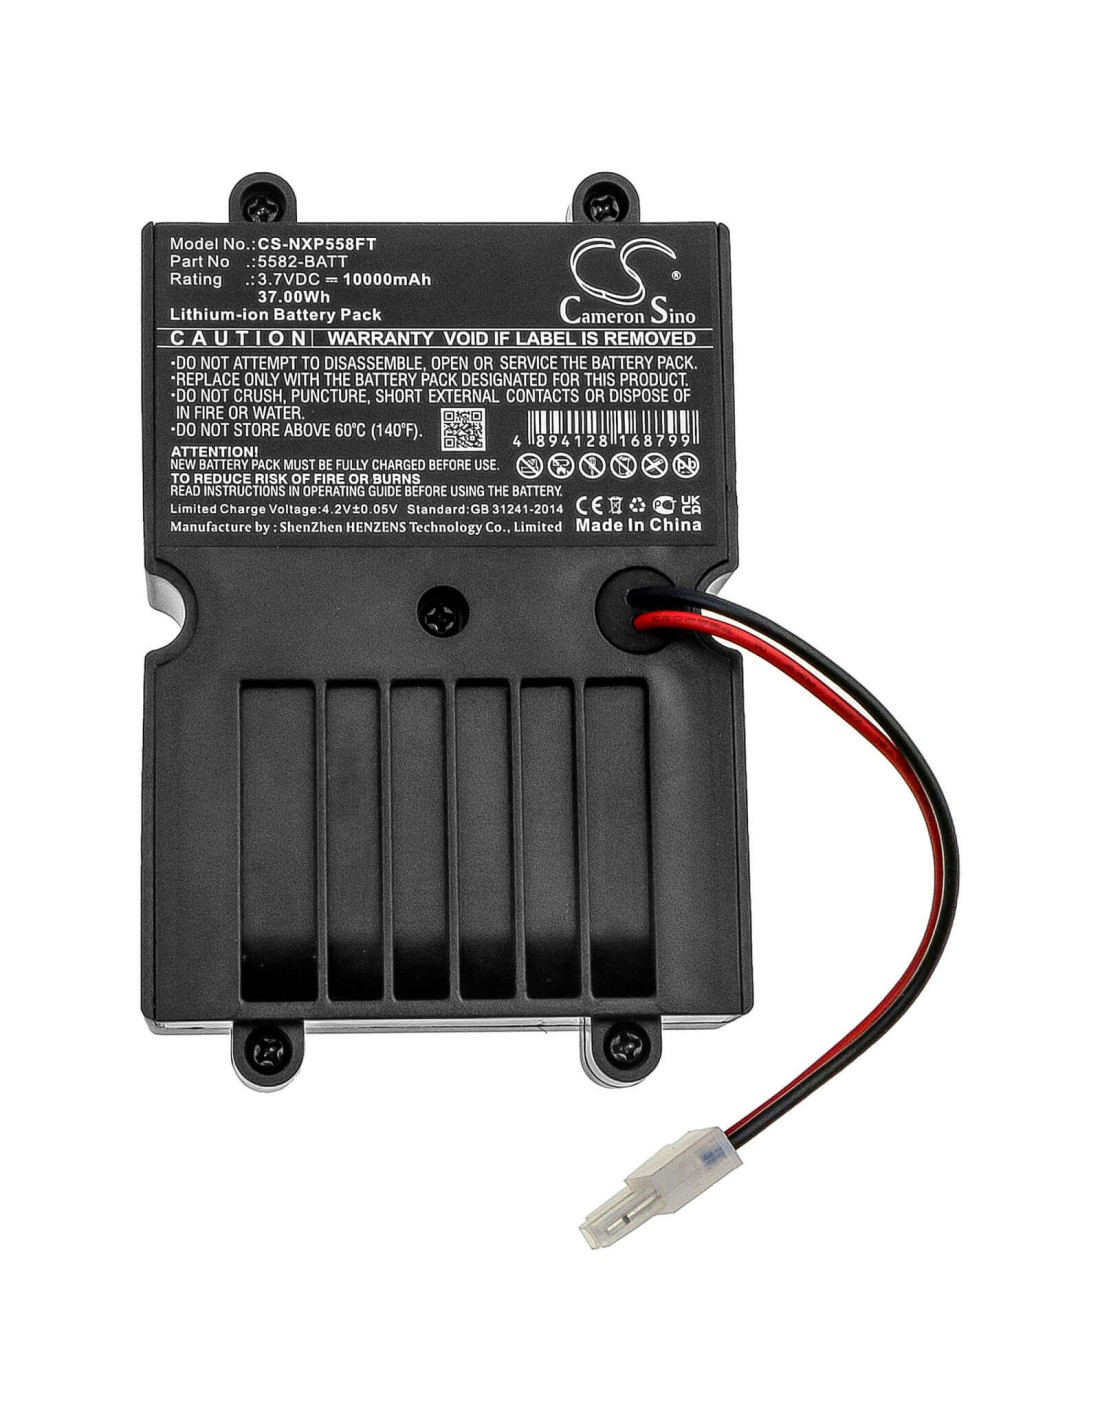 Battery for Nightstick, Xpp-5582rx, Xpr-5582gx 3.7V, 10000mAh - 37.00Wh